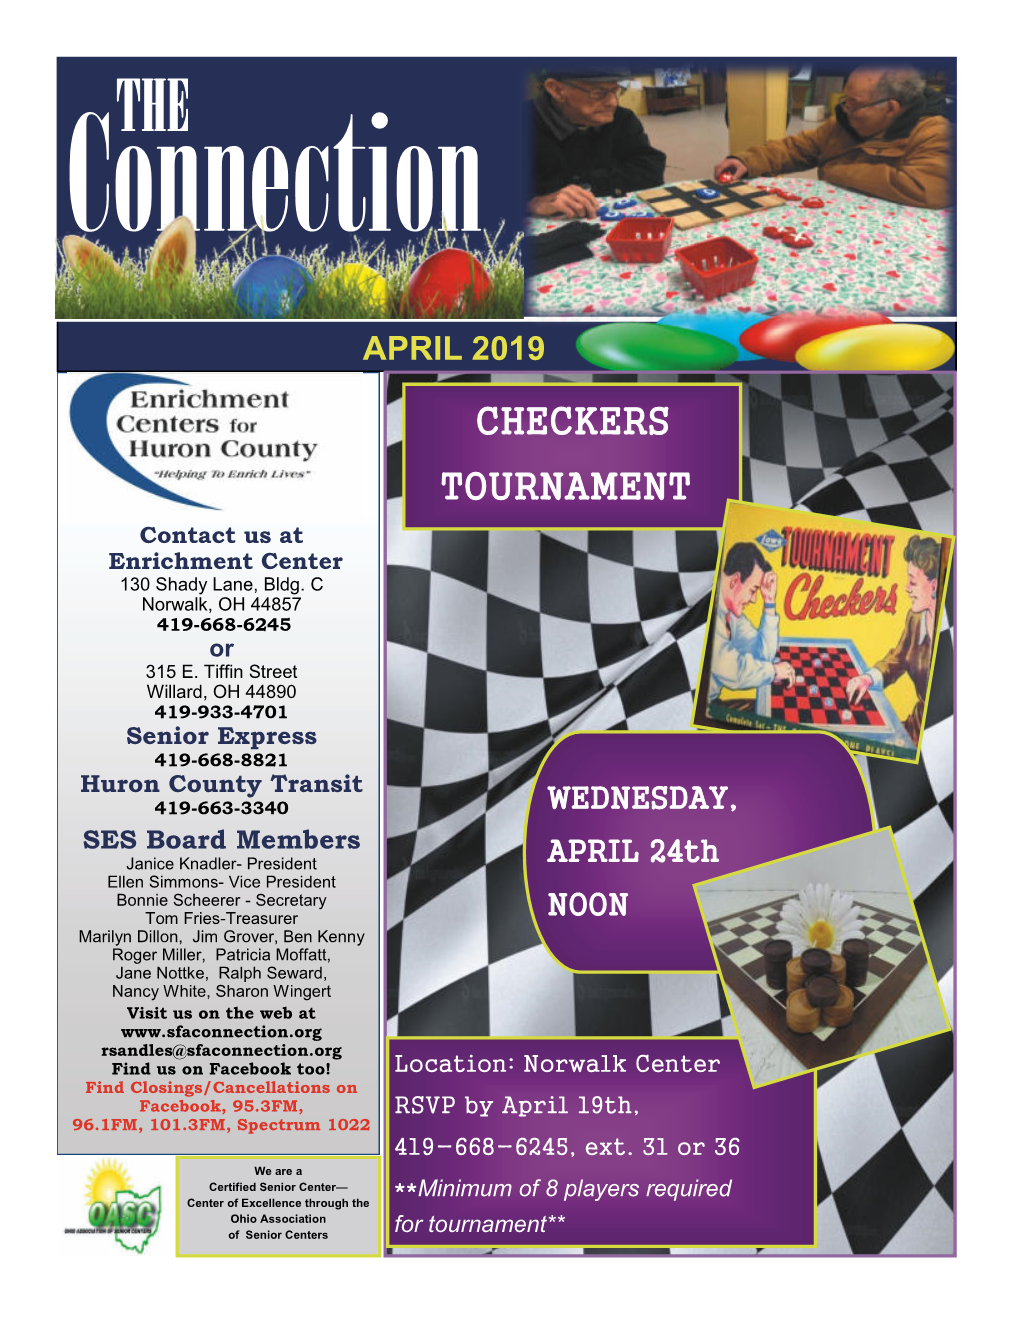 CHECKERS TOURNAMENT Contact Usw at Enrichment Center 130 Shady Lane, Bldg